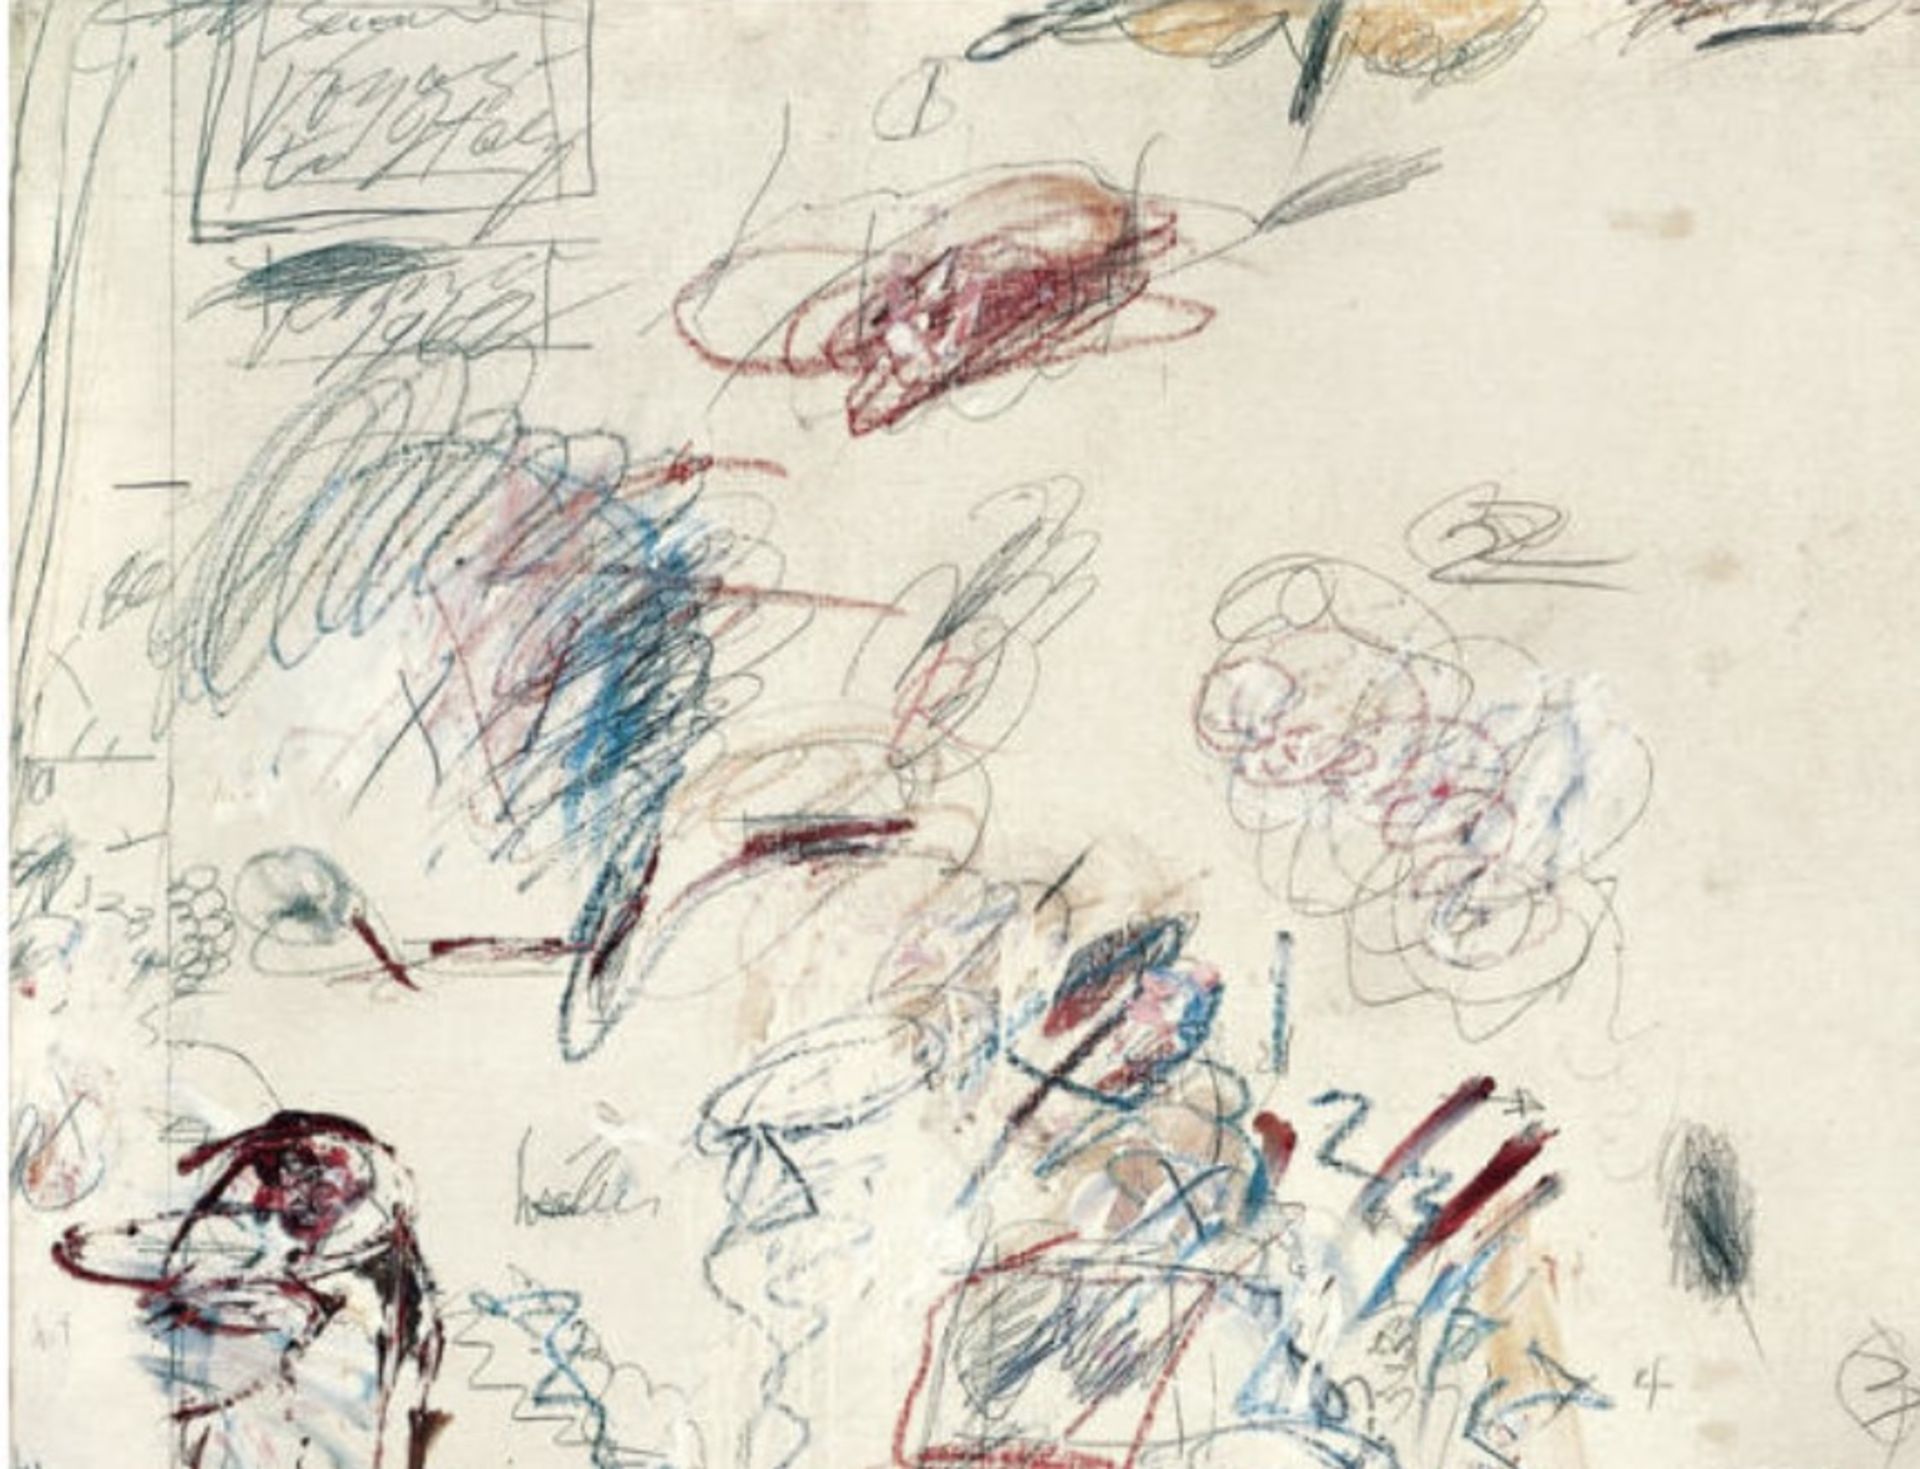 Cy Twombly "Second Voyage to Italy, 1962" Offset Lithograph - Image 3 of 5